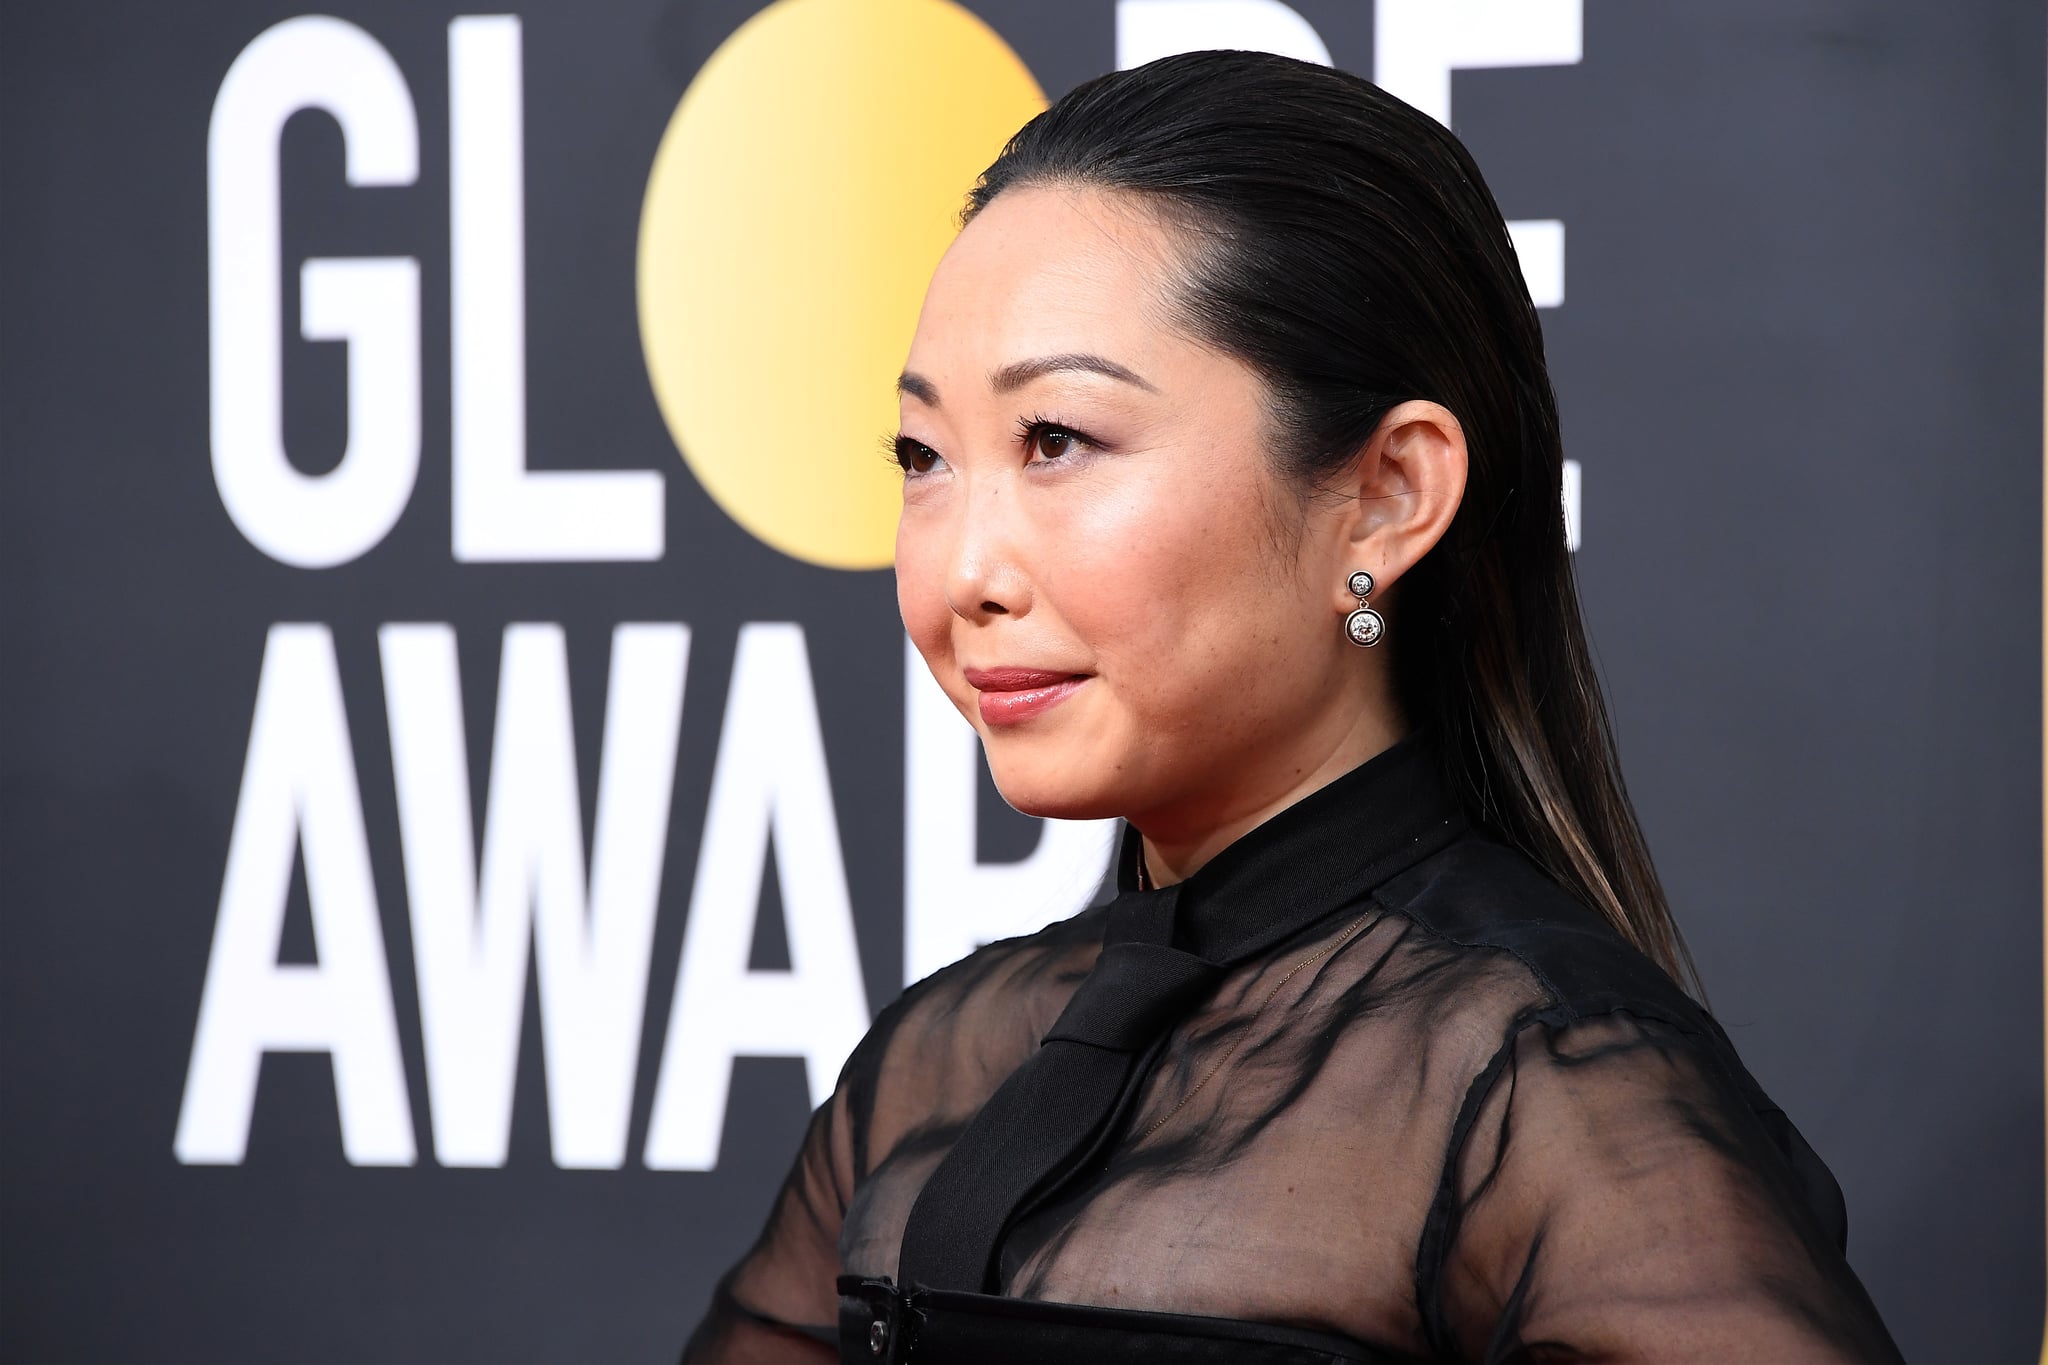 BEVERLY HILLS, CALIFORNIA - JANUARY 05: Lulu Wang attends the 77th Annual Golden Globe Awards at The Beverly Hilton Hotel on January 05, 2020 in Beverly Hills, California. (Photo by Steve Granitz/WireImage)